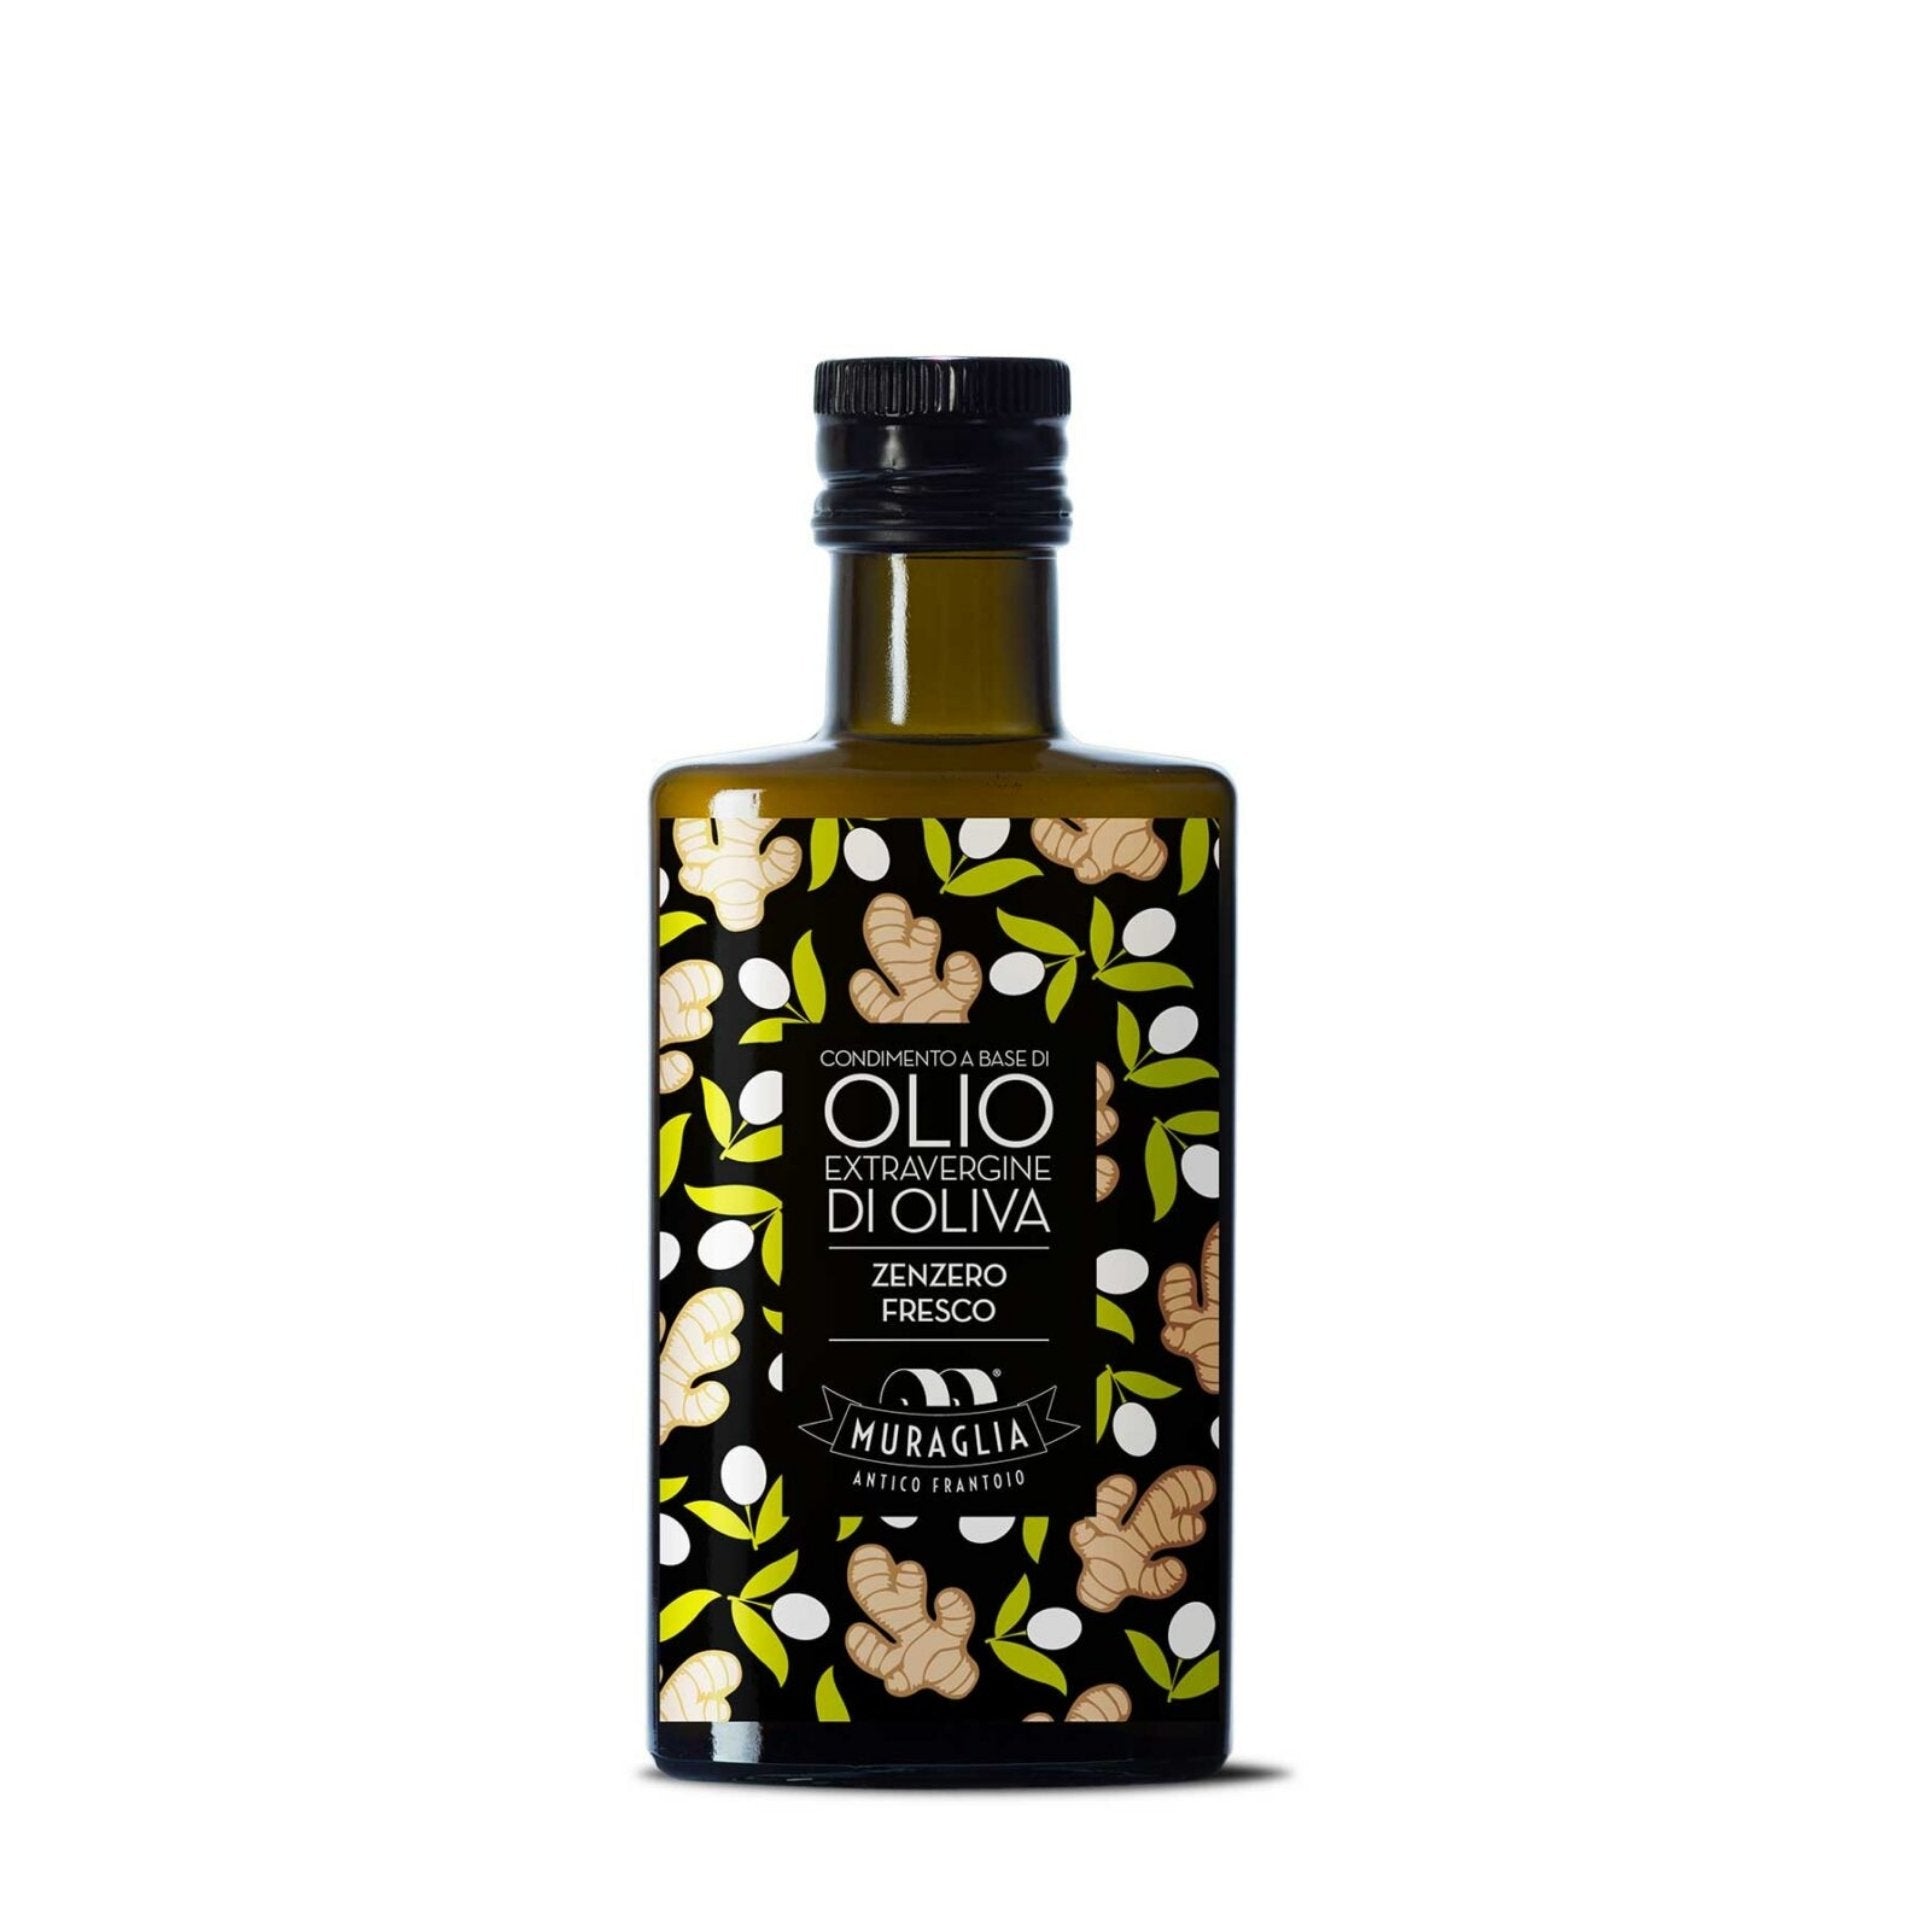 Frantoio Muraglia Ginger Extra Virgin Olive Oil 200ml  | Imported and distributed in the UK by Just Gourmet Foods